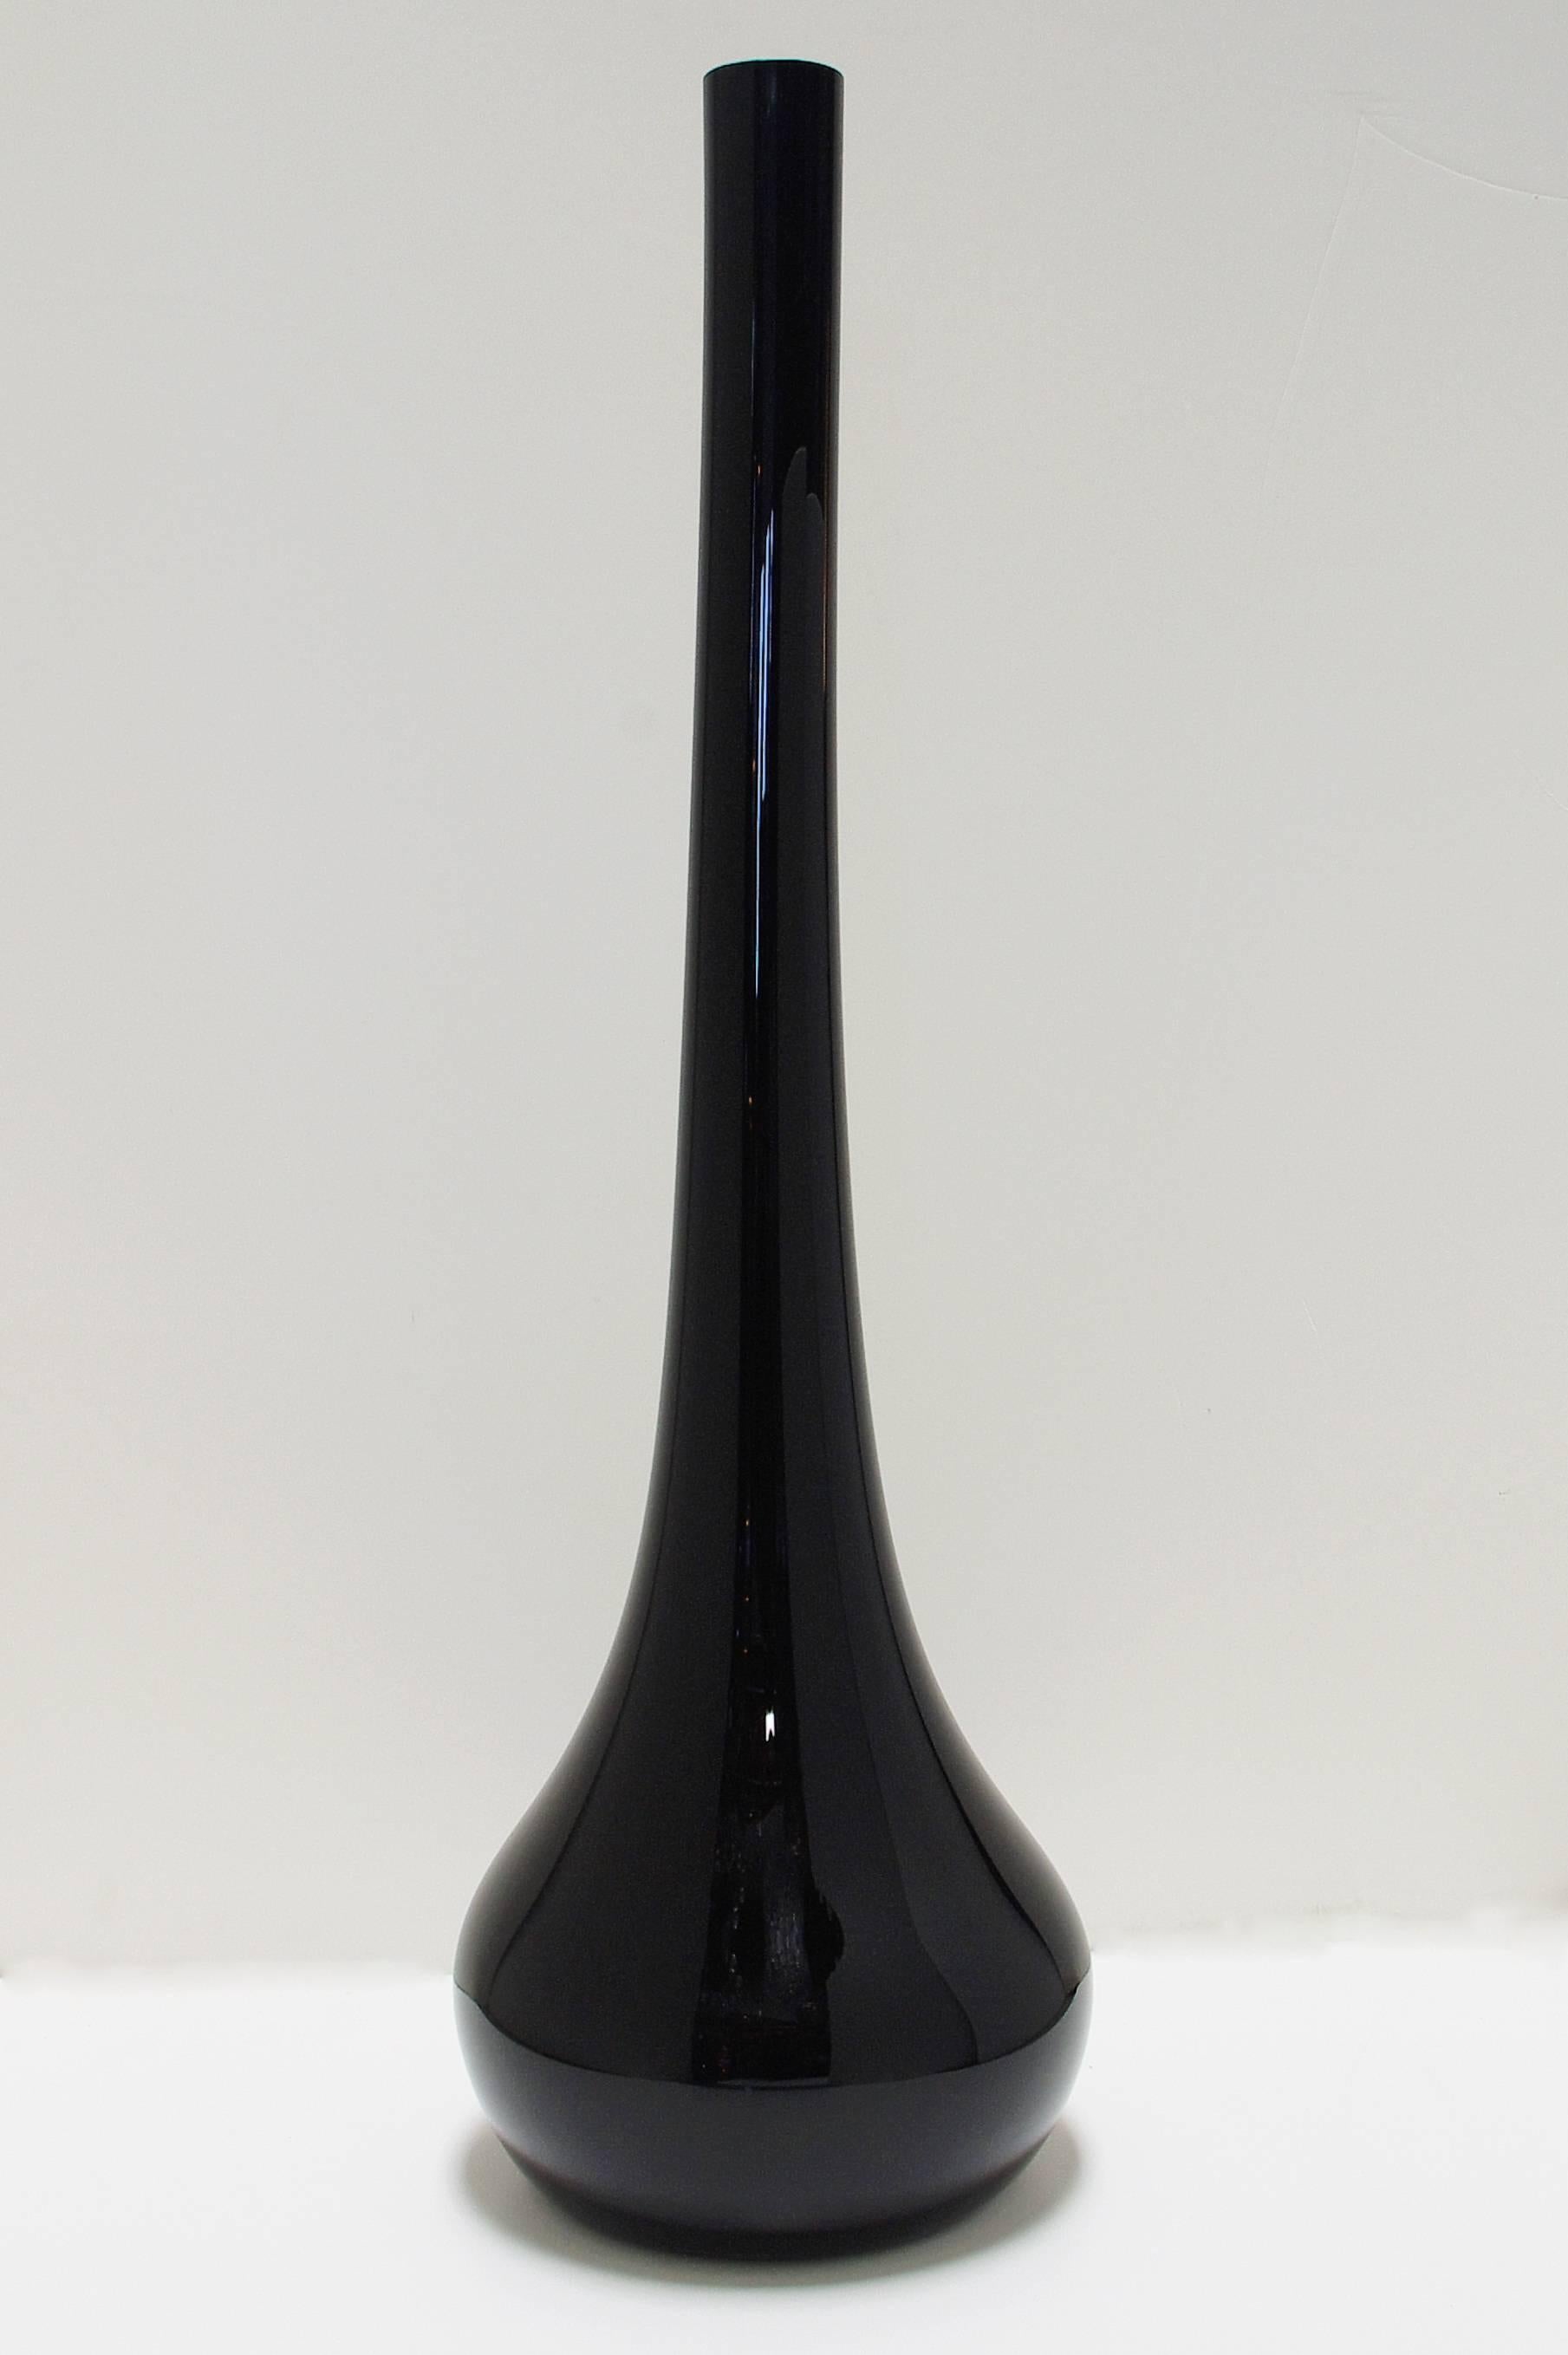 Tall Italian vase made with hand blown black Murano glass, made in Italy in the 1980s
Measures: Diameter 9.5 inches / height: 32 inches.
1 in stock in Palm Springs currently on sale for $599!!!

This piece makes for a great and unique gift!

 